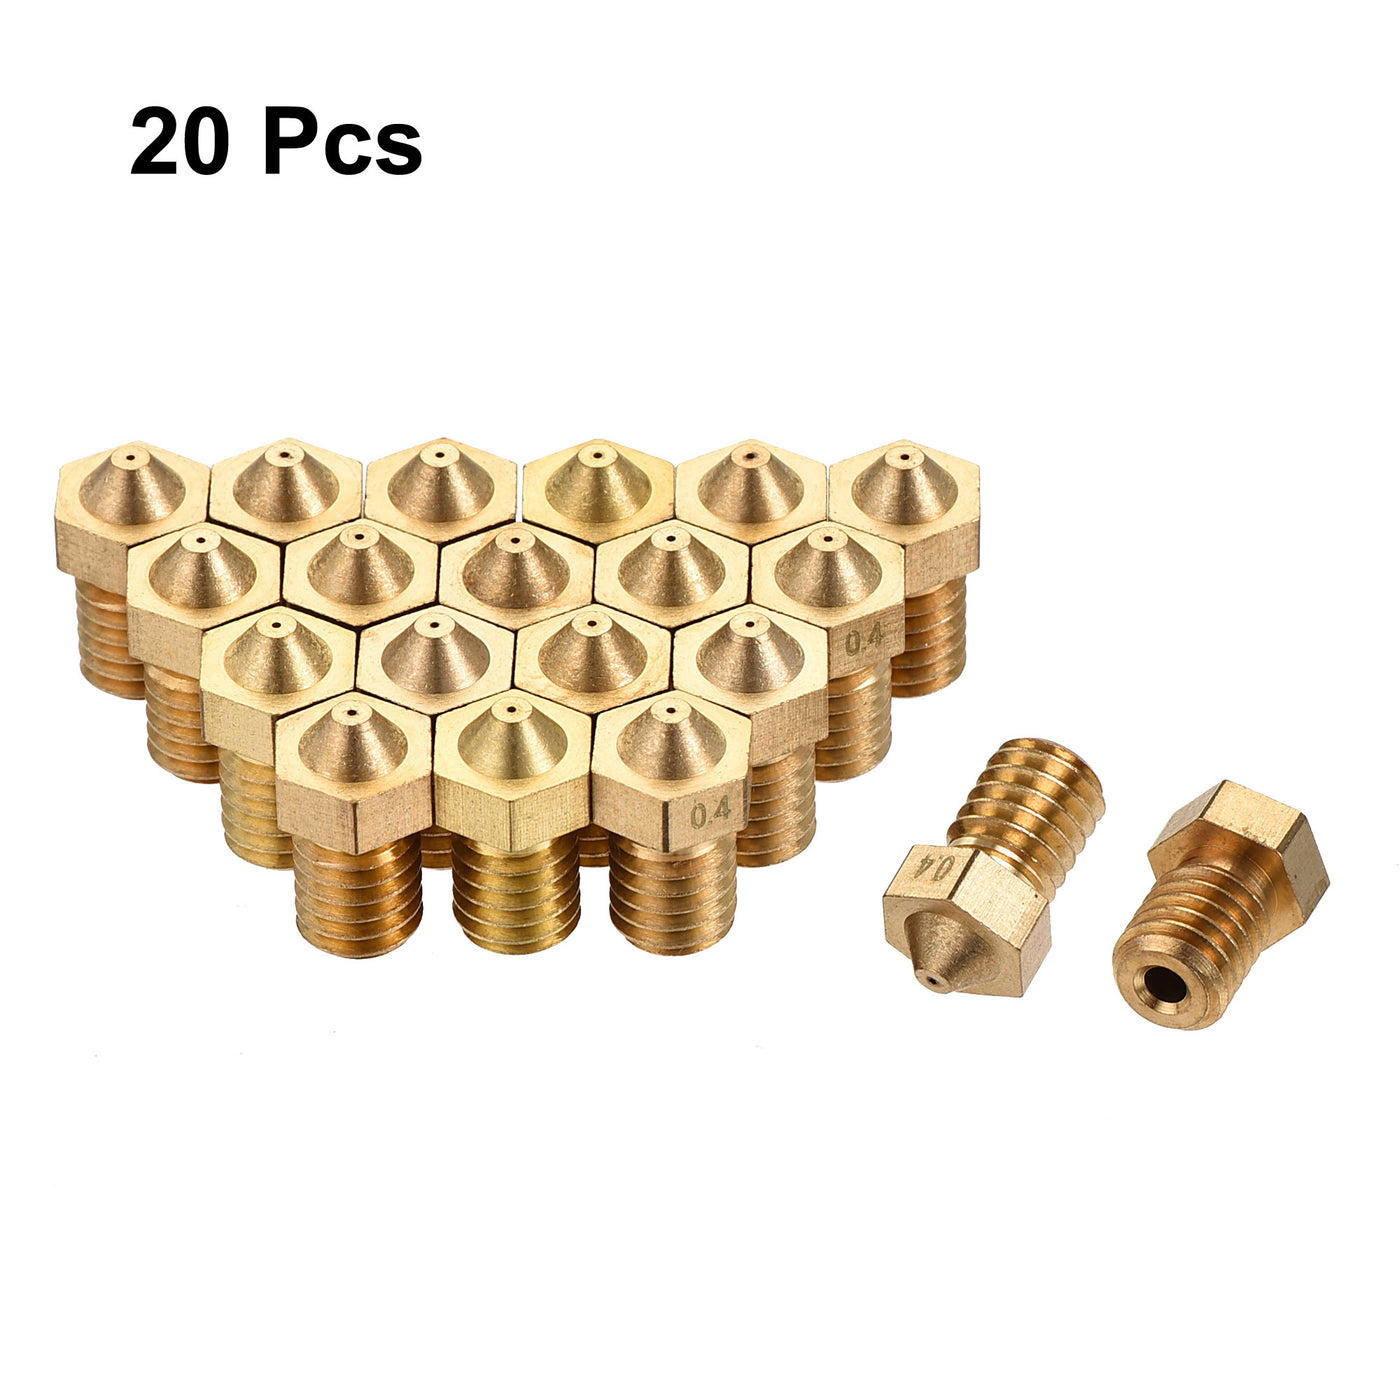 uxcell Uxcell 0.4mm 3D Printer Nozzle, 20pcs M6 Thread for V5 V6 1.75mm Extruder Print, Brass